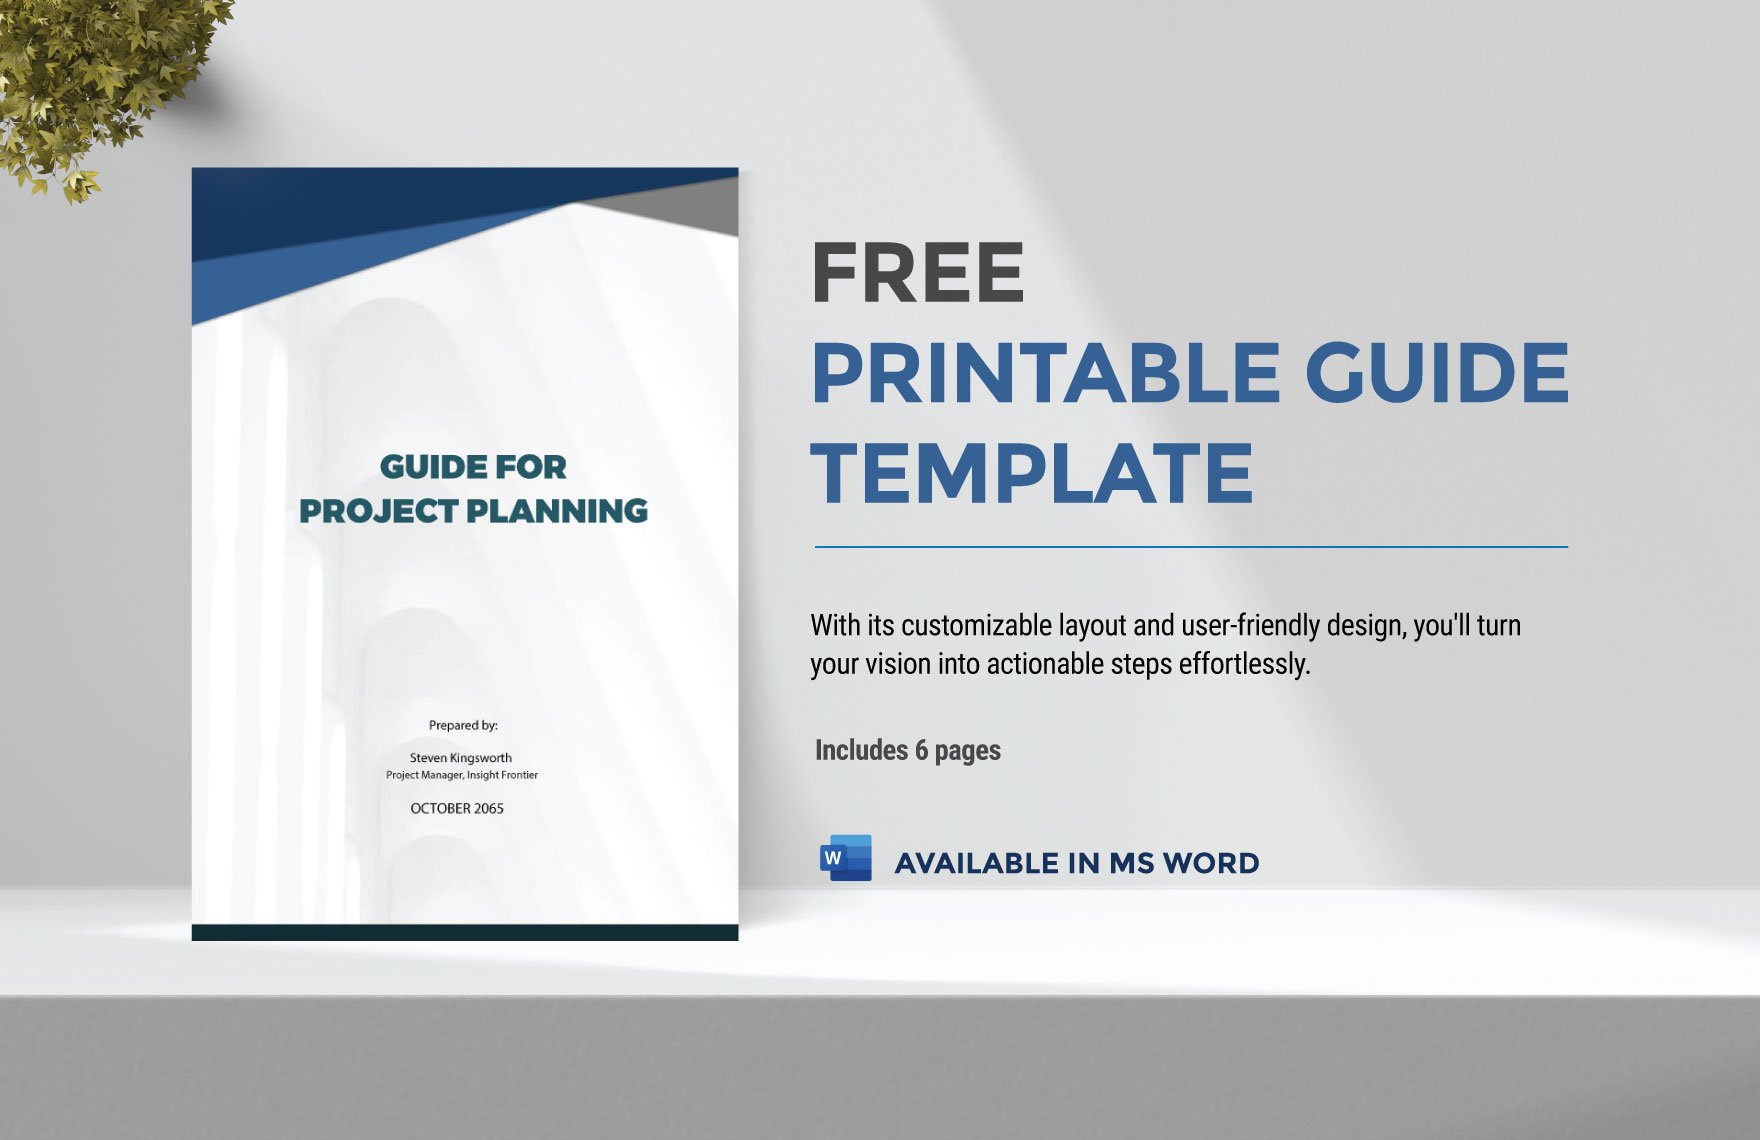 Free Printable Guide Template